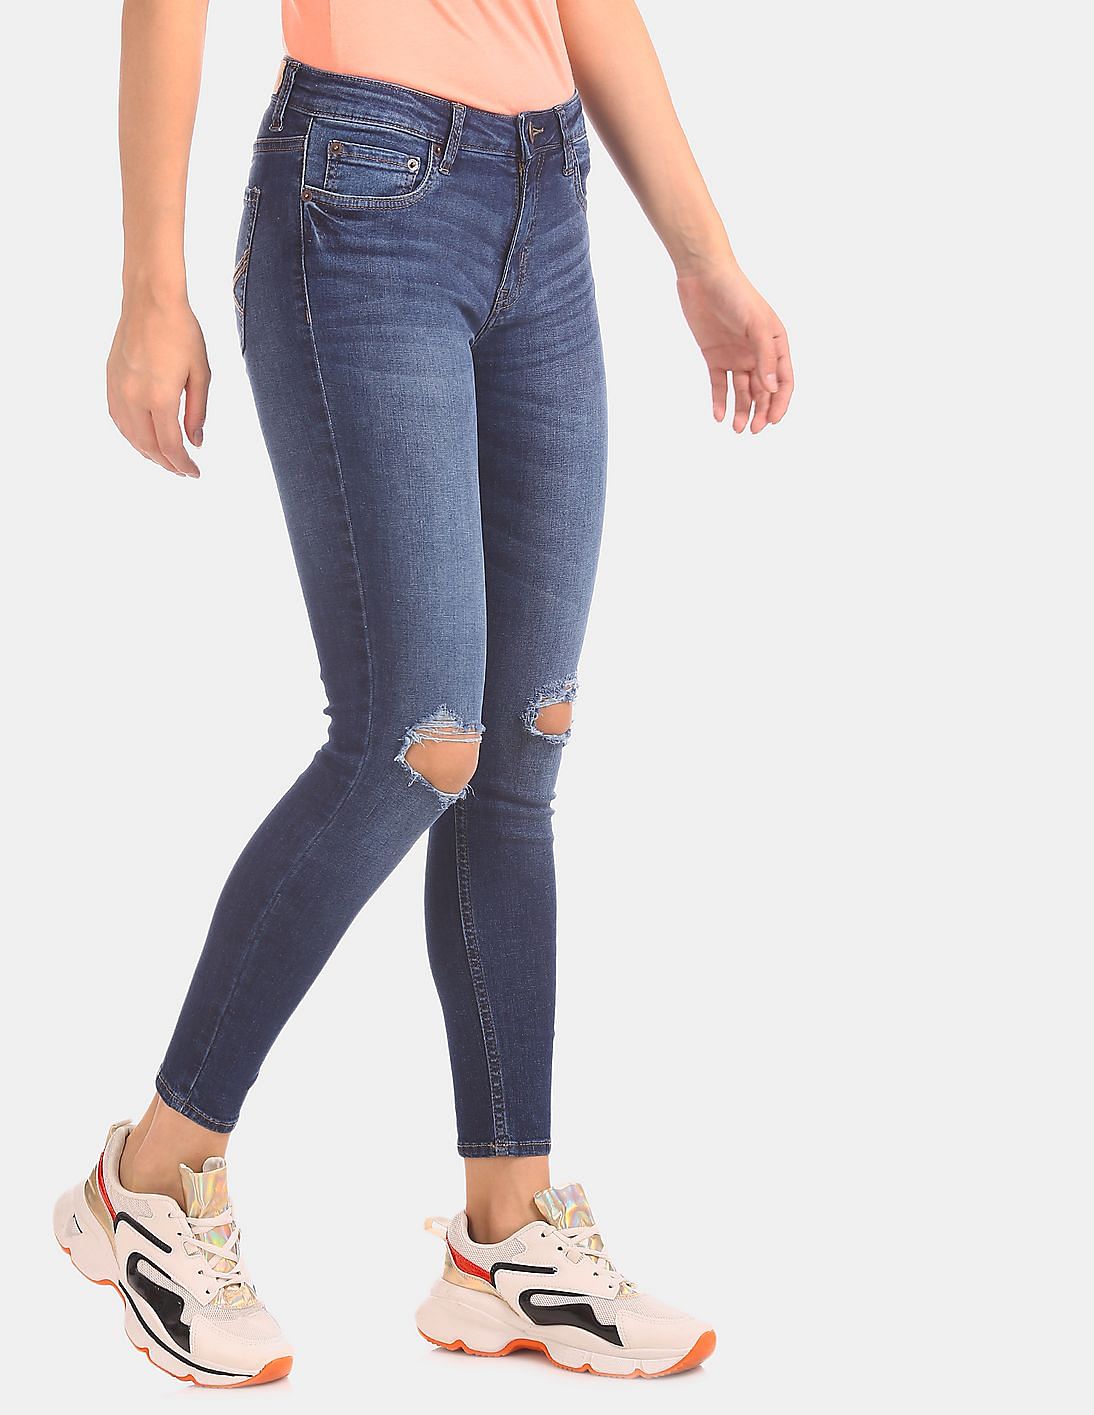 Buy Aeropostale Women Blue Slim Fit Ripped Washed Jeans - NNNOW.com